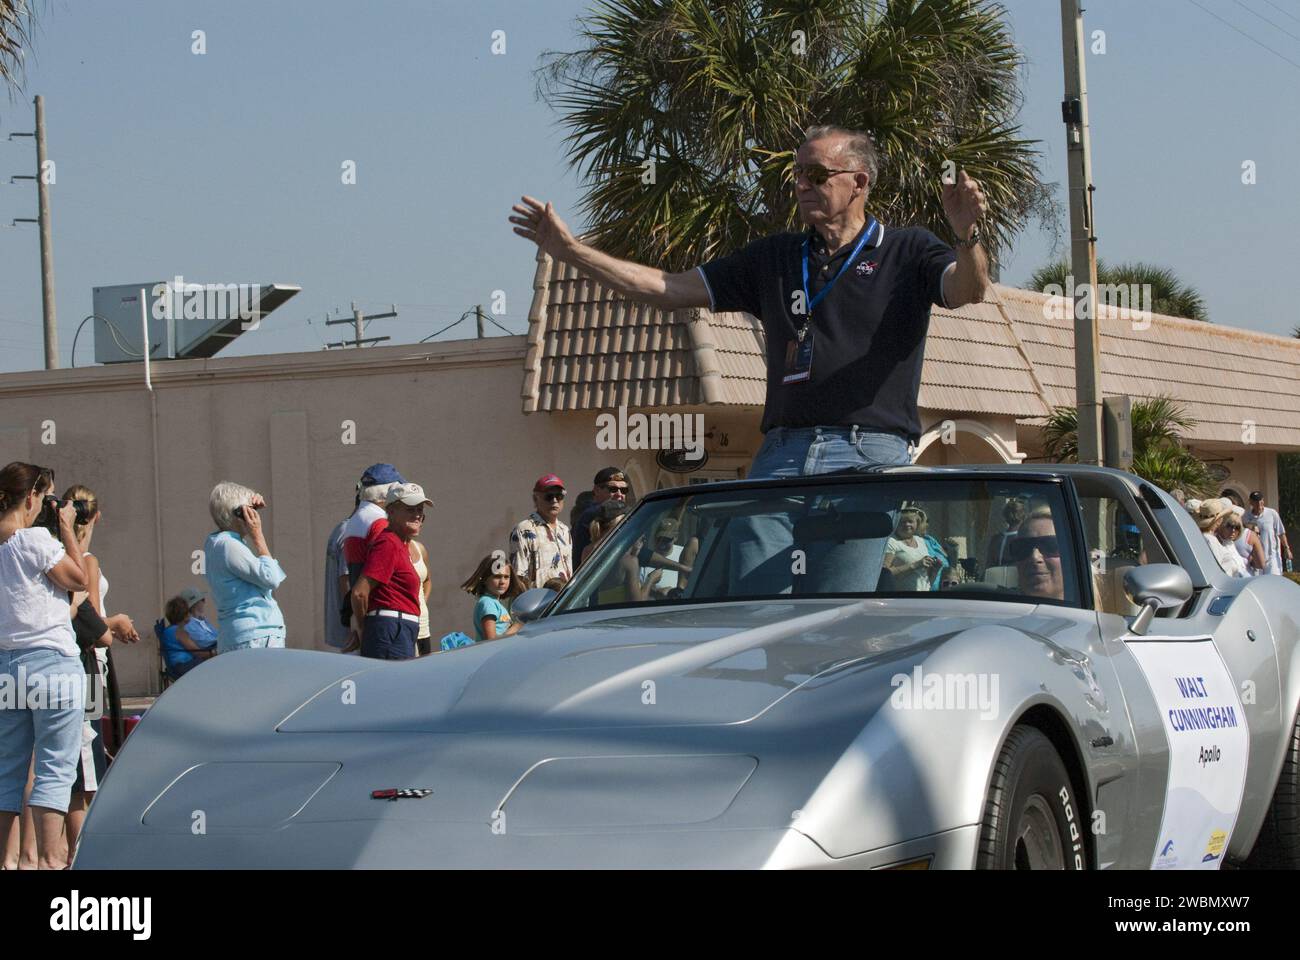 Cape Canaveral, Fla. -- Retired Apollo astronaut Walt Cunningham greets spectators from a vintage Chevrolet Corvette during a commemorative parade in Cocoa Beach, Fla.      A group of current and retired NASA astronauts gathered in Cocoa Beach to commemorate NASA’s 50 years of accomplishments and to honor astronaut Alan Shepard’s Mercury/Freedom 7 suborbital flight May 5, 1961.The event was marked by a parade, with the astronauts riding in a fleet of Chevrolet Corvettes that corresponded with the time period of their space missions. Members of the Cape Kennedy Corvette Club, a group establishe Stock Photo